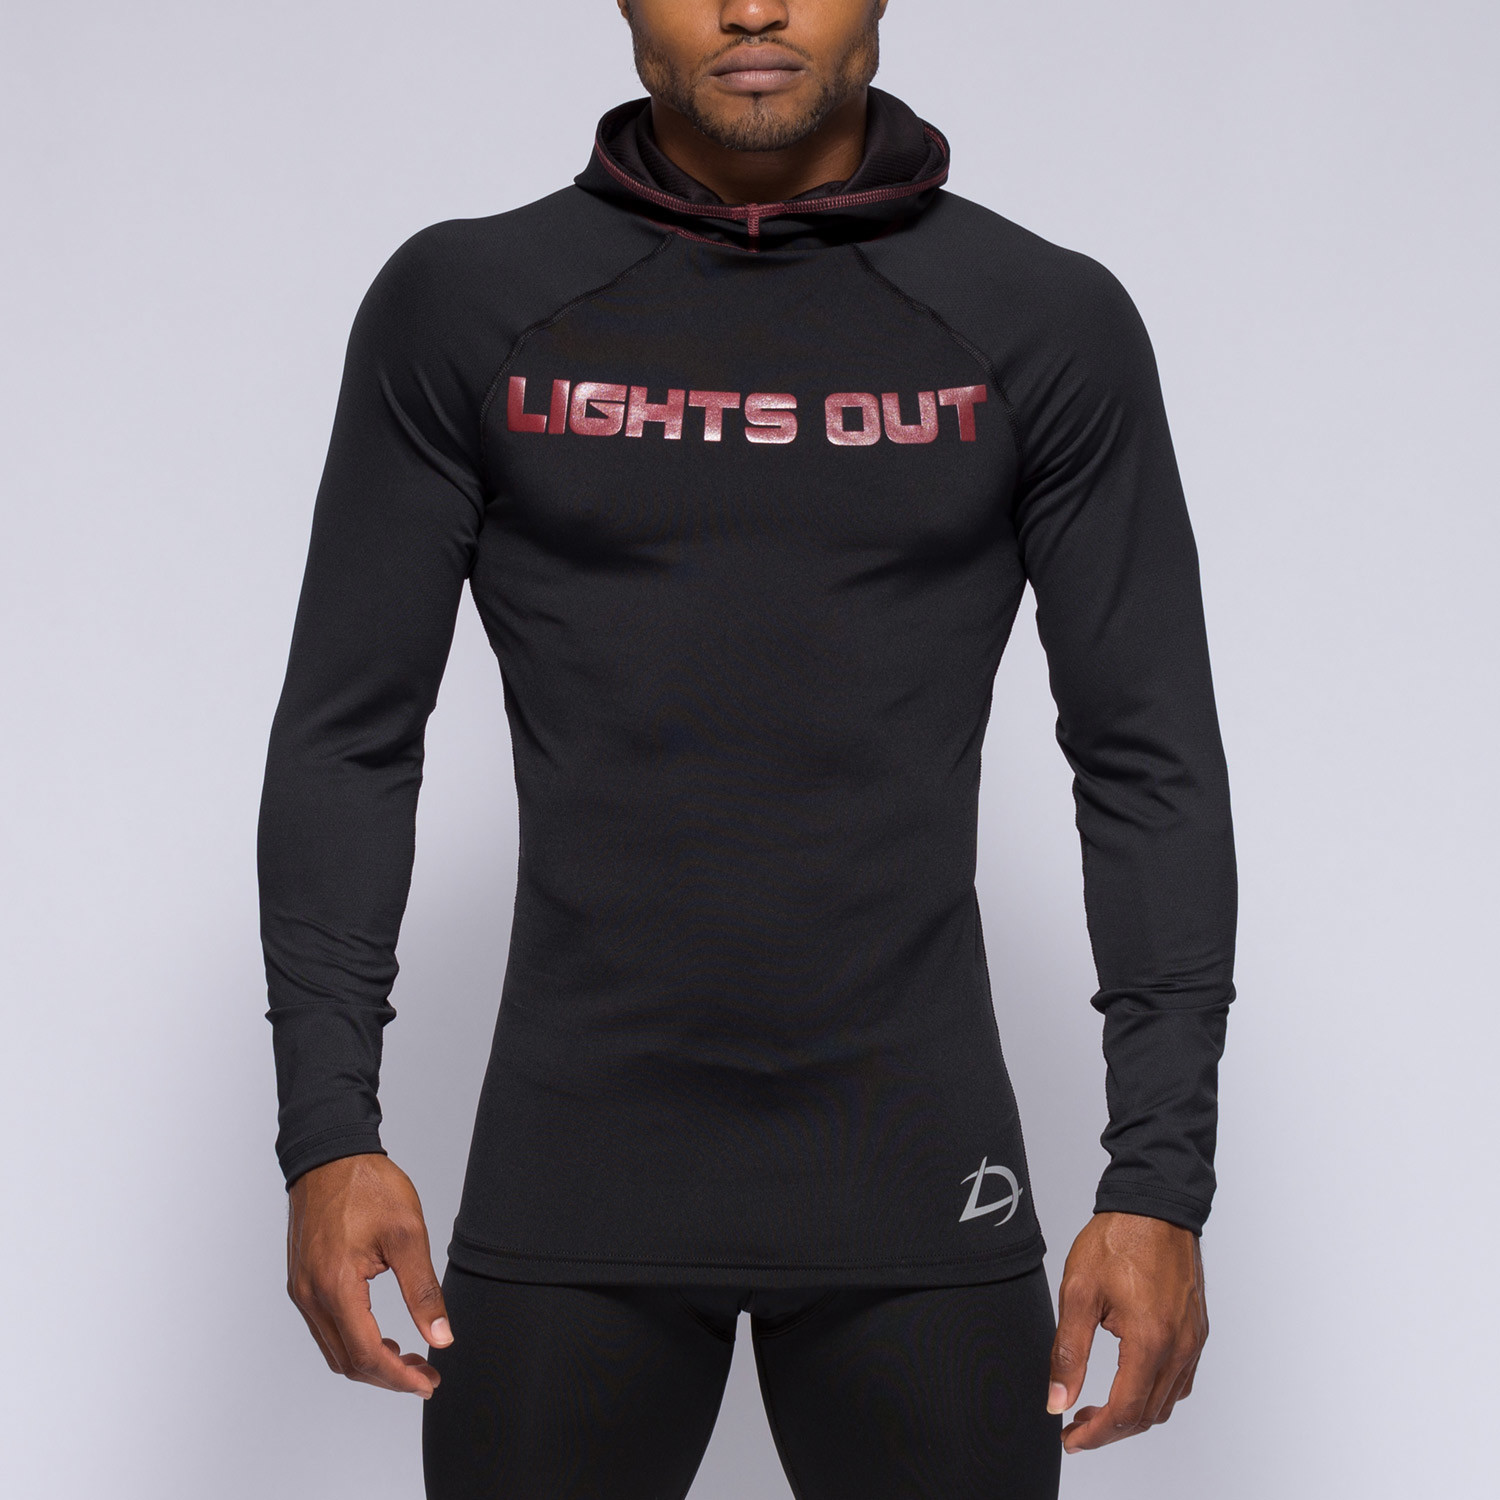 Long-Sleeve Compression Hoodie // Black (S) - Lights Out - Touch